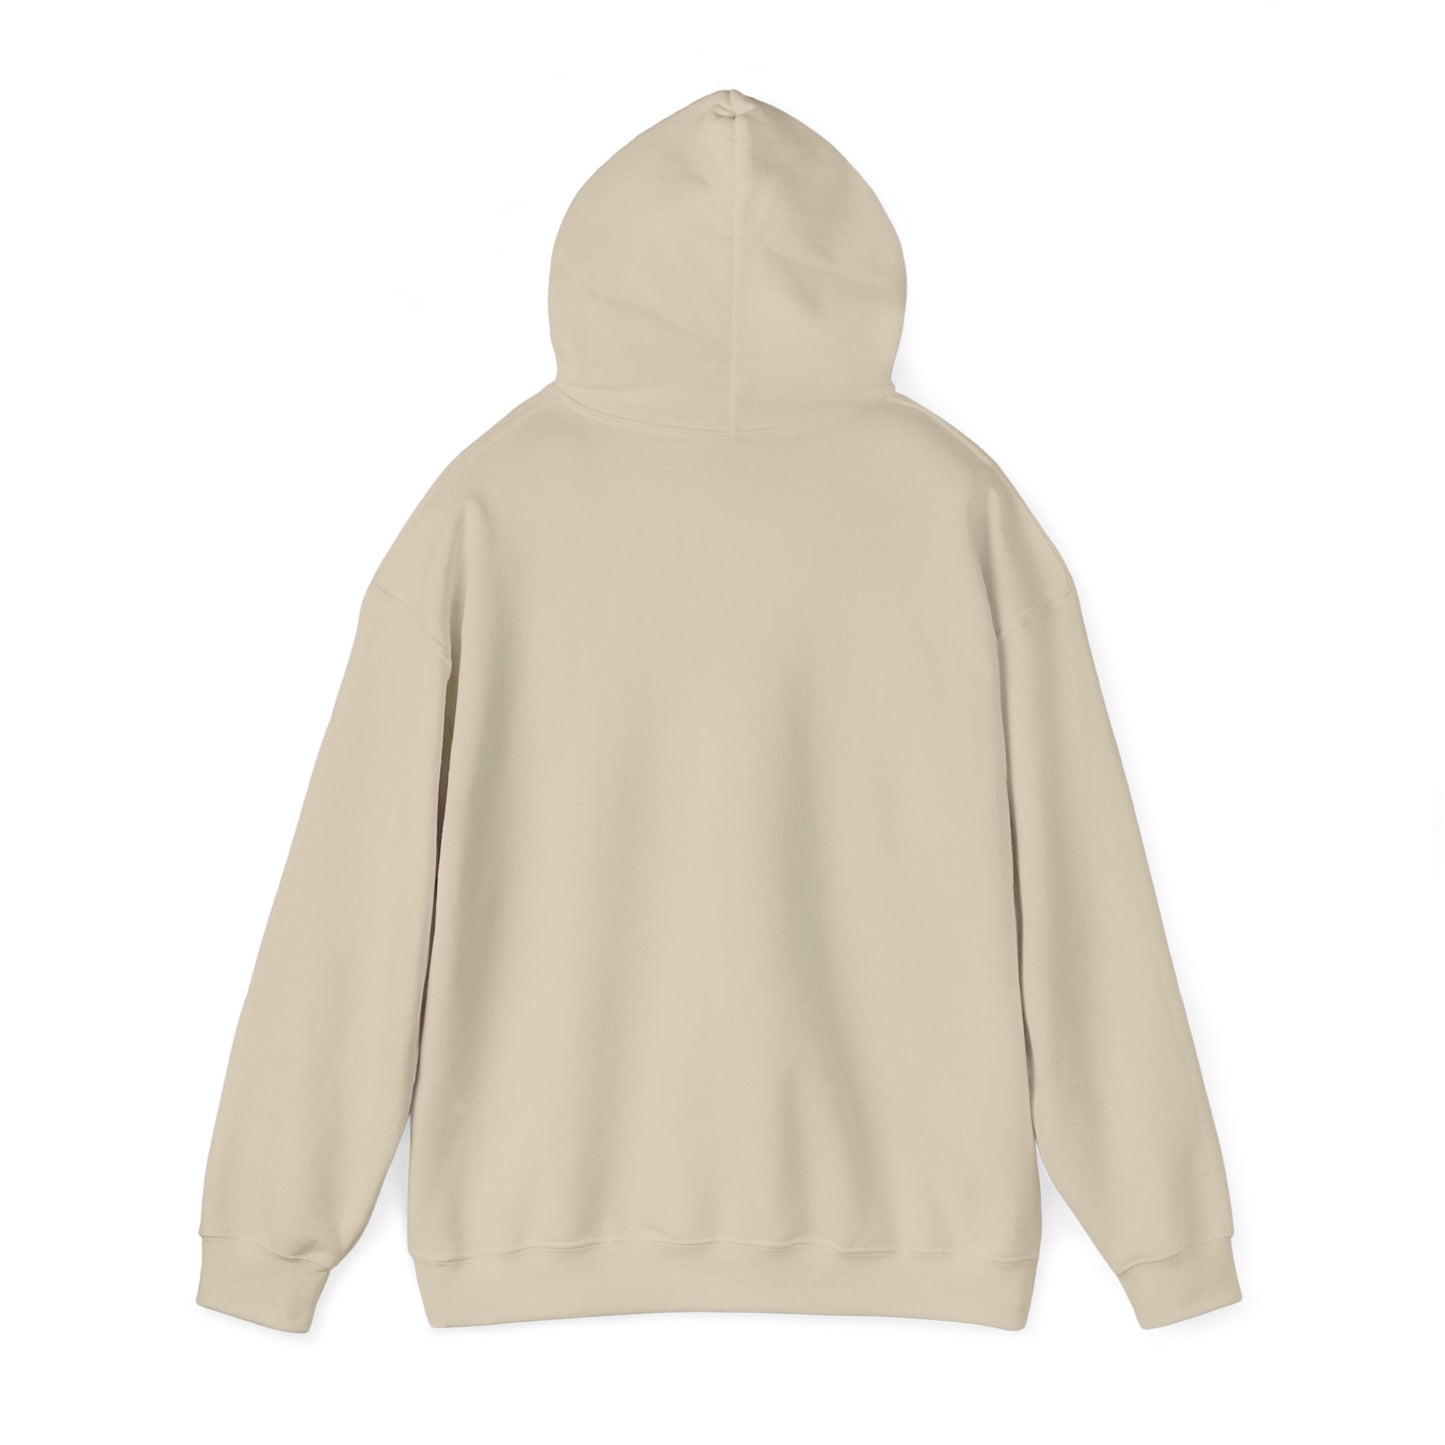 Montauk Essential Cozy Hoodie - Unisex Heavy Blend for Ultimate Comfort & Style